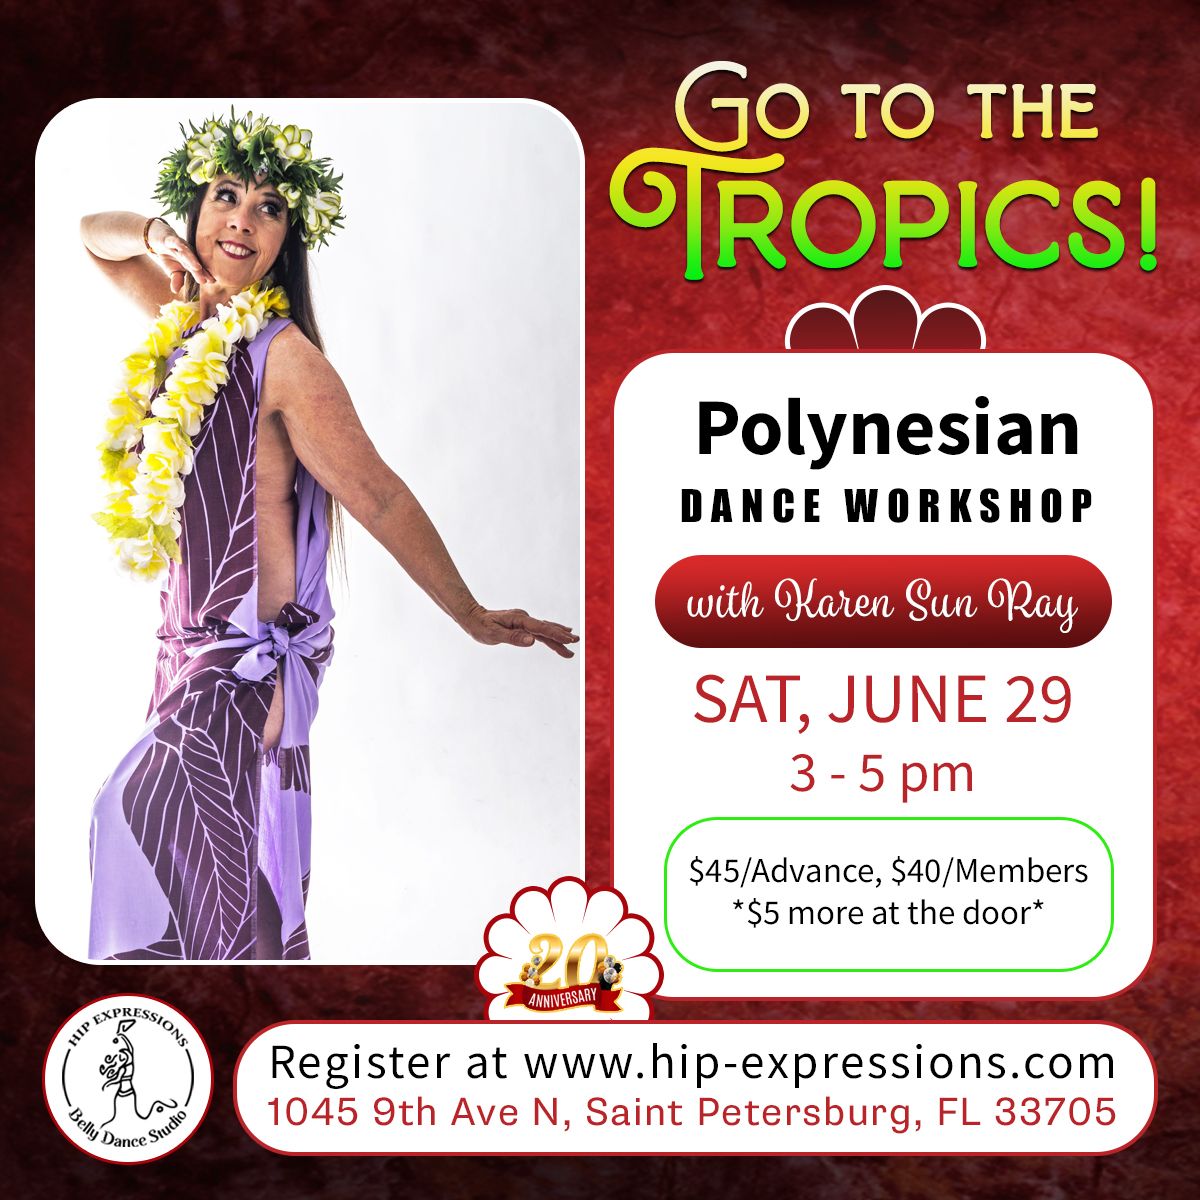 Polynesian Dance Workshop with Karen Sun Ray |  Sat, June 29 | 3 - 5 pm | At Hip Expressions